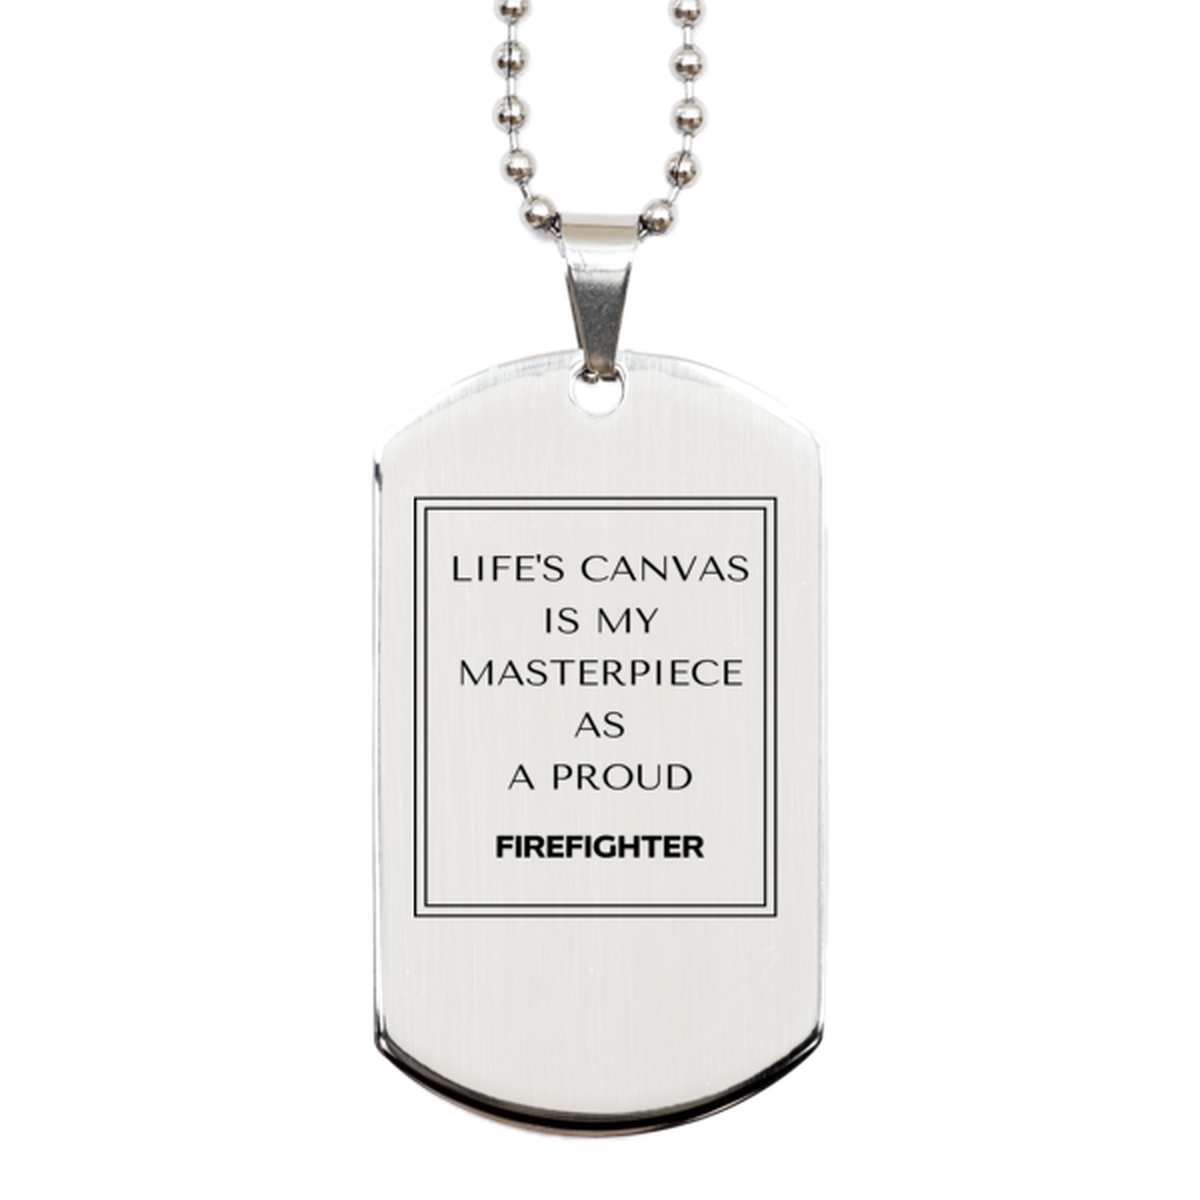 Proud Firefighter Gifts, Life's canvas is my masterpiece, Epic Birthday Christmas Unique Silver Dog Tag For Firefighter, Coworkers, Men, Women, Friends